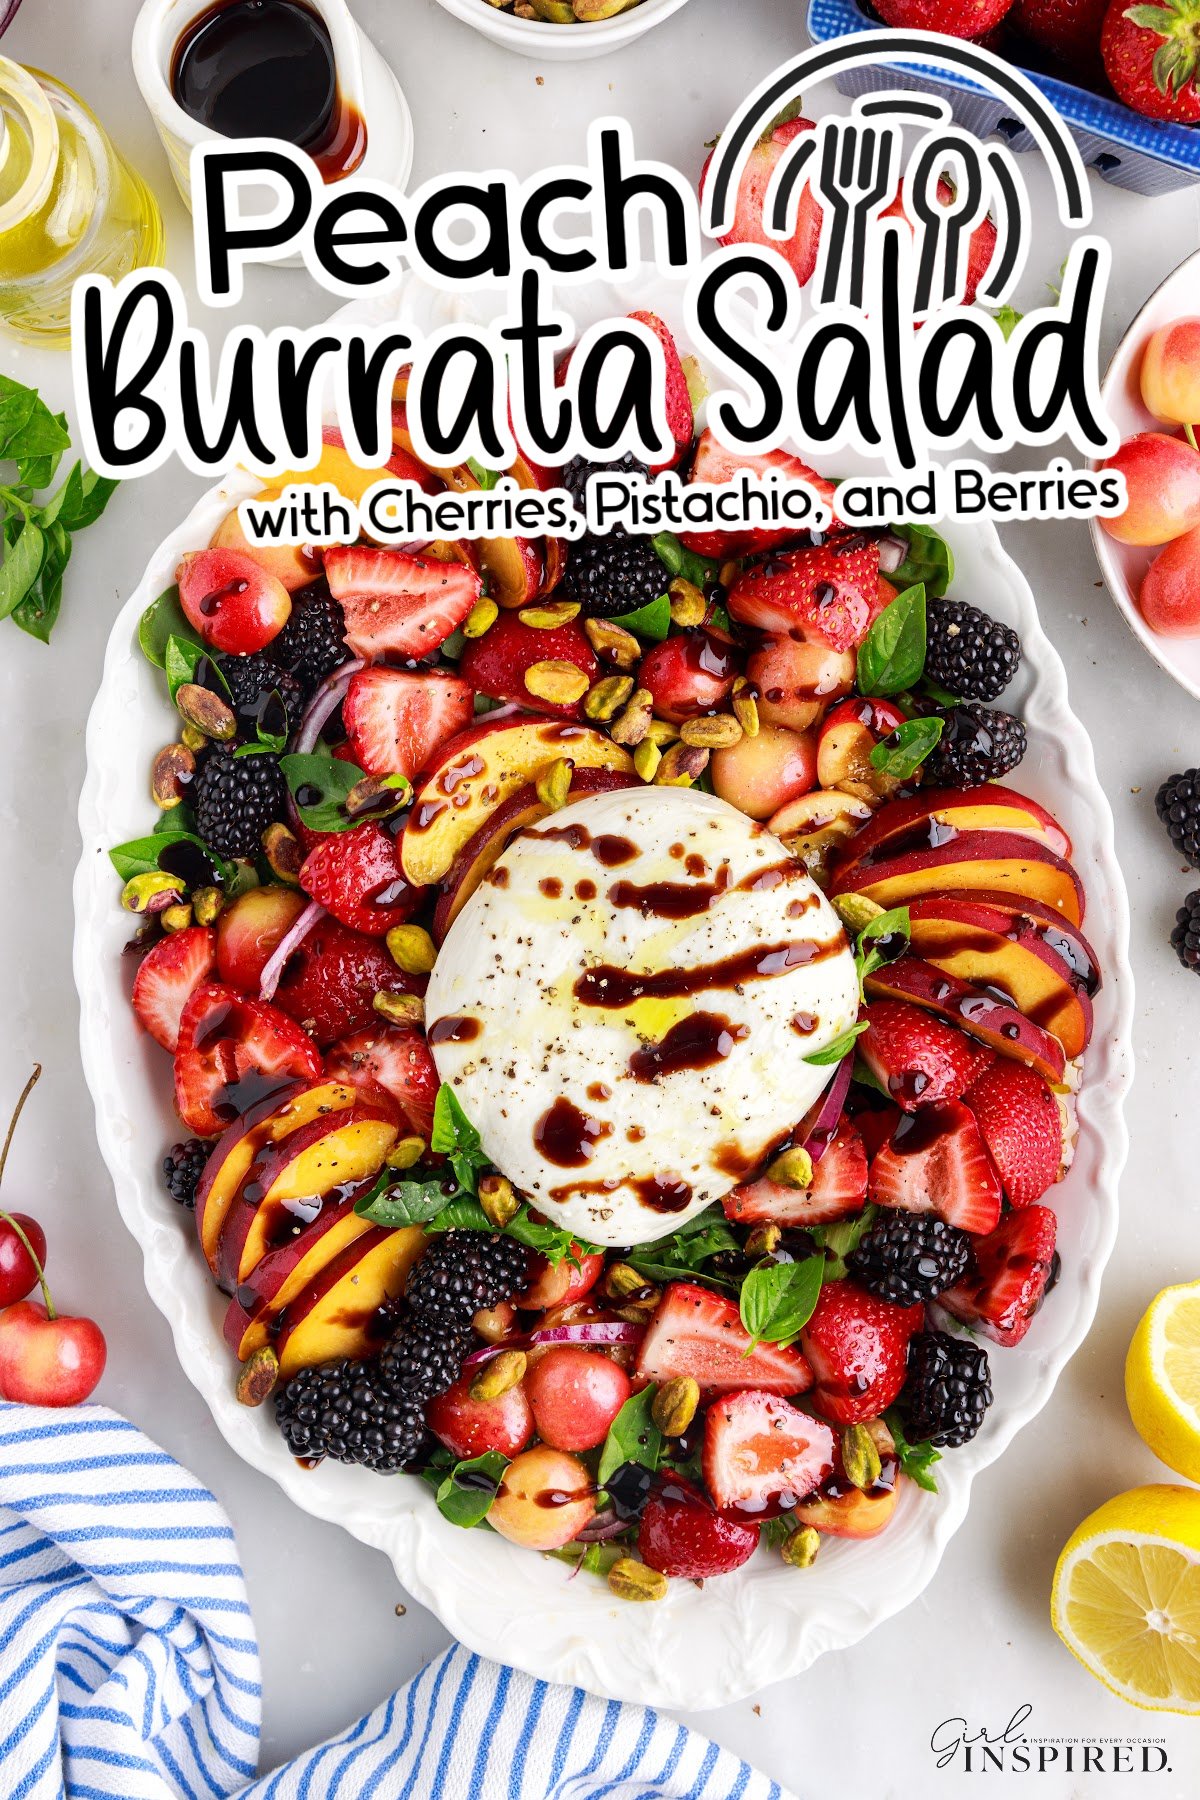 Peach burrata salad featuring sliced peaches, strawberries, blackberries, greens, cherries, pistachios, and a ball of burrata cheese in the center of a large serving platter.